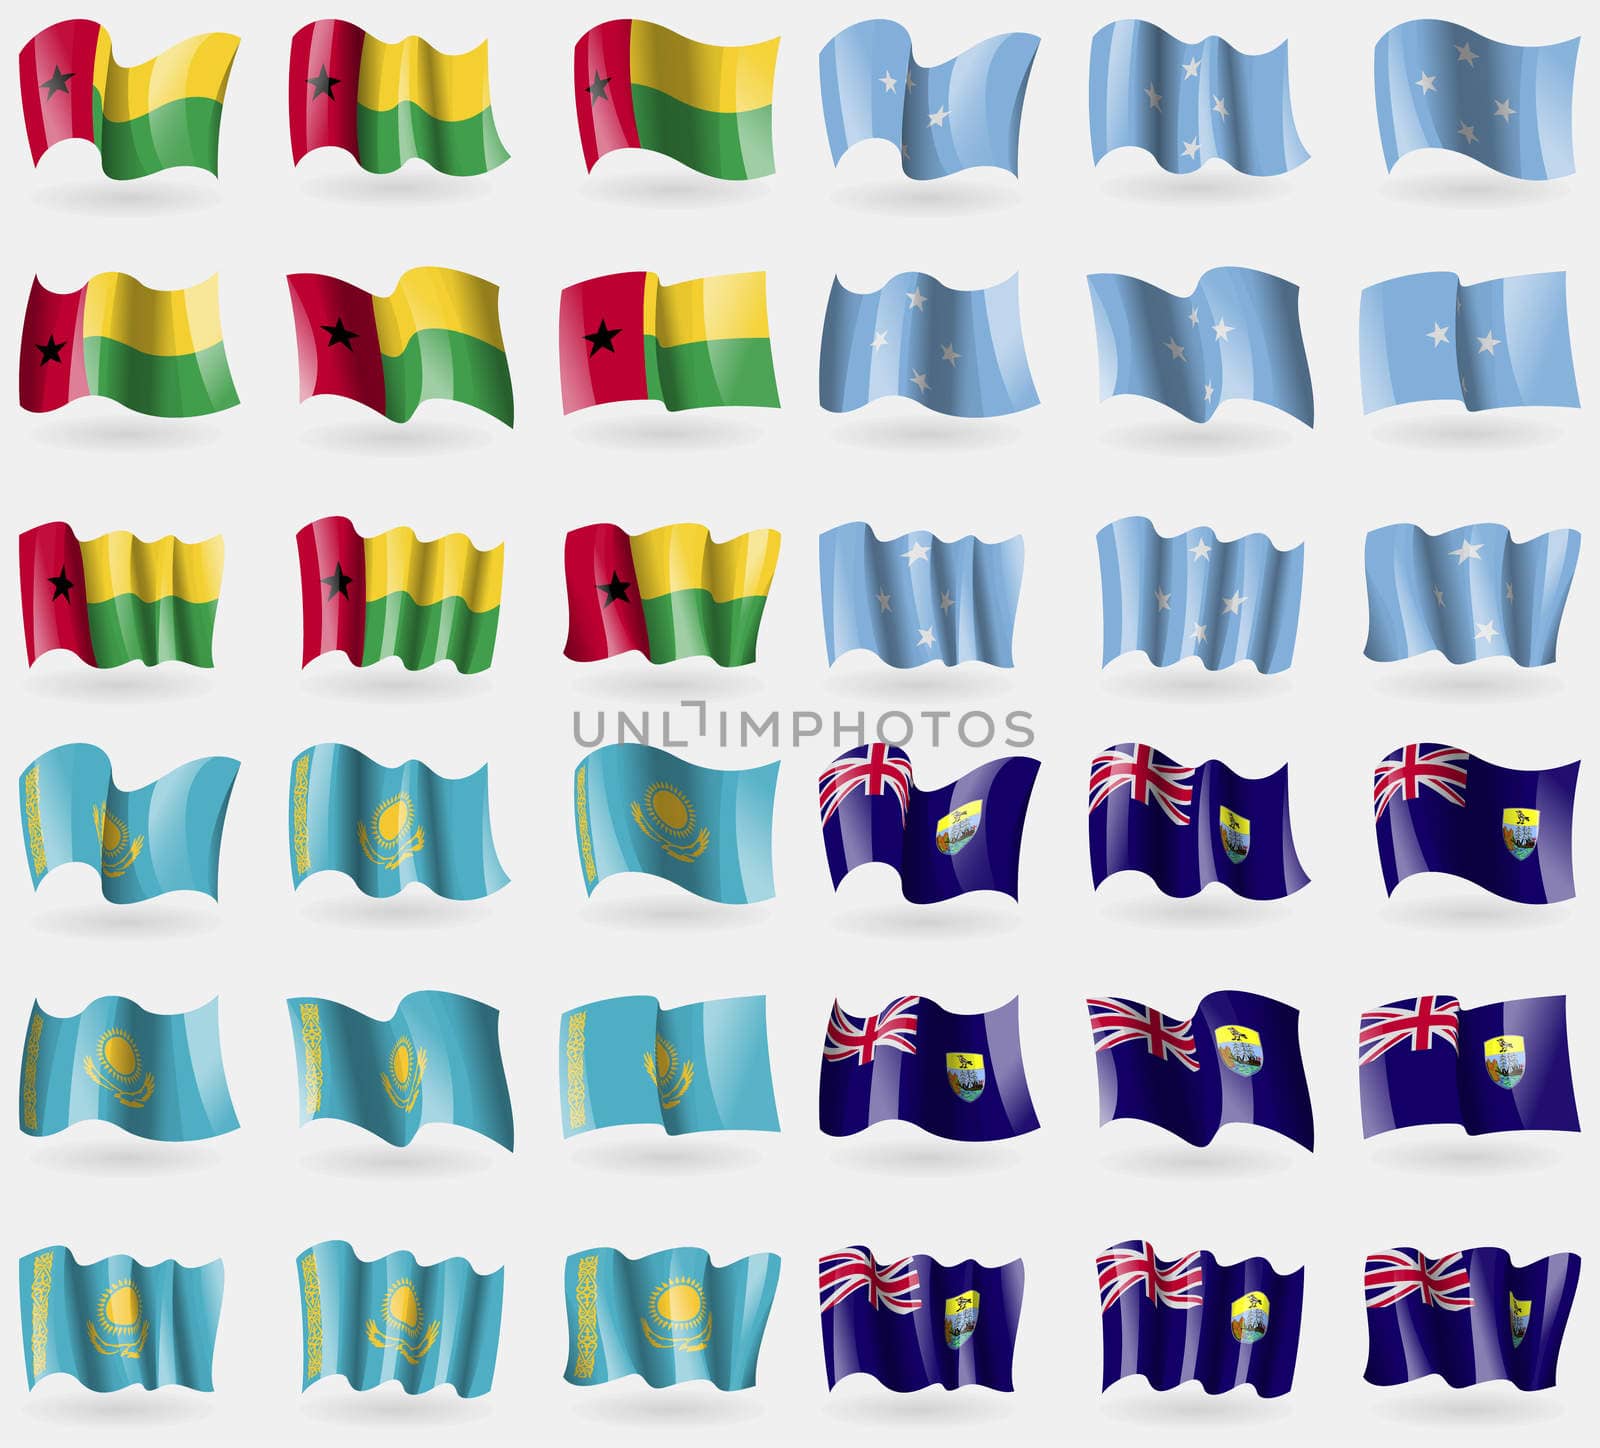 GuineaBissau, Micronesia, Kazakhstan, Saint Helena. Set of 36 flags of the countries of the world. illustration